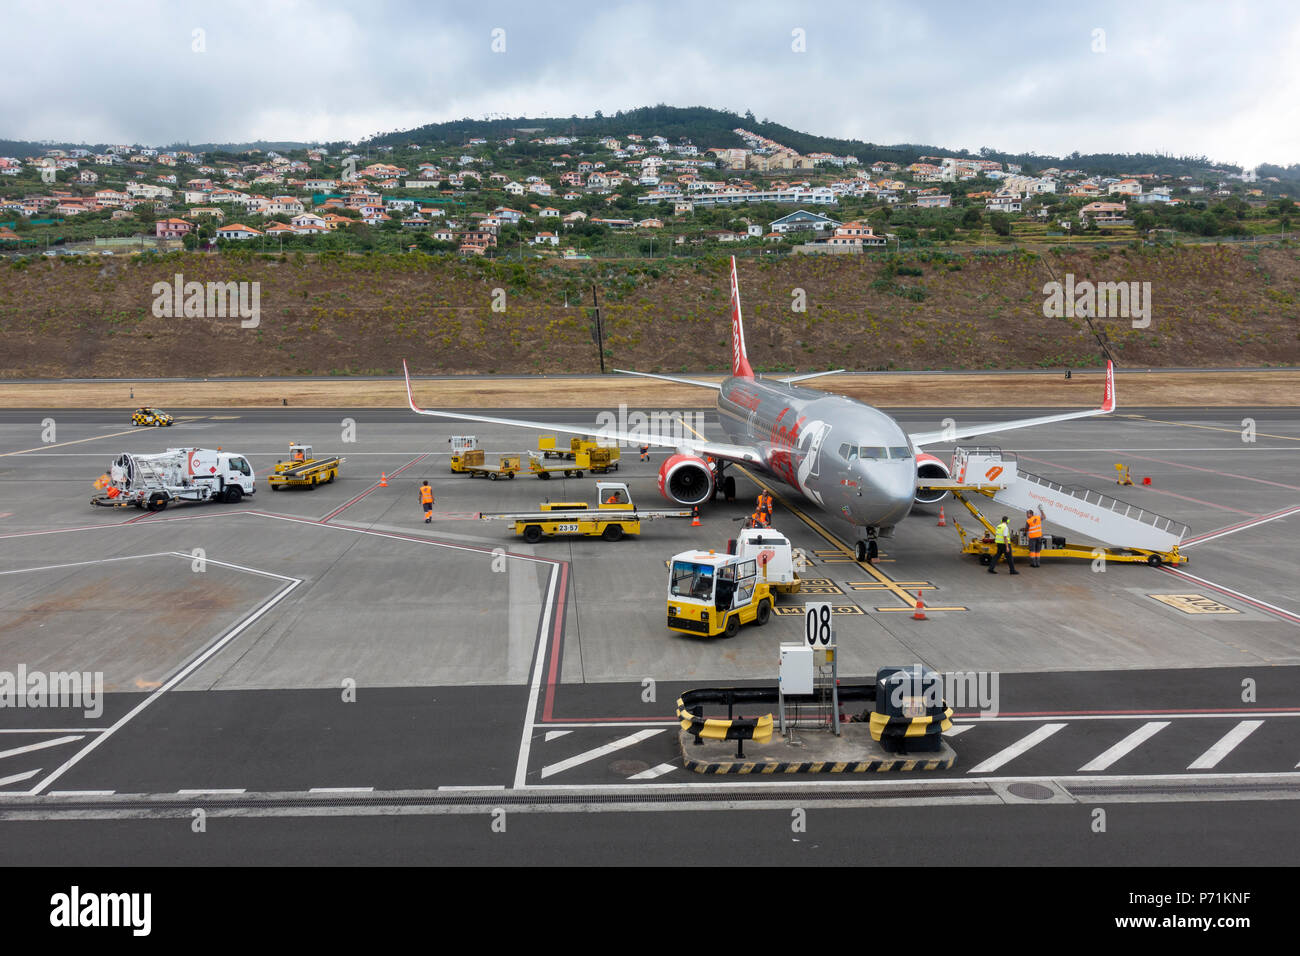 Plane being prepared for departure at Madeira Airport Stock Photo